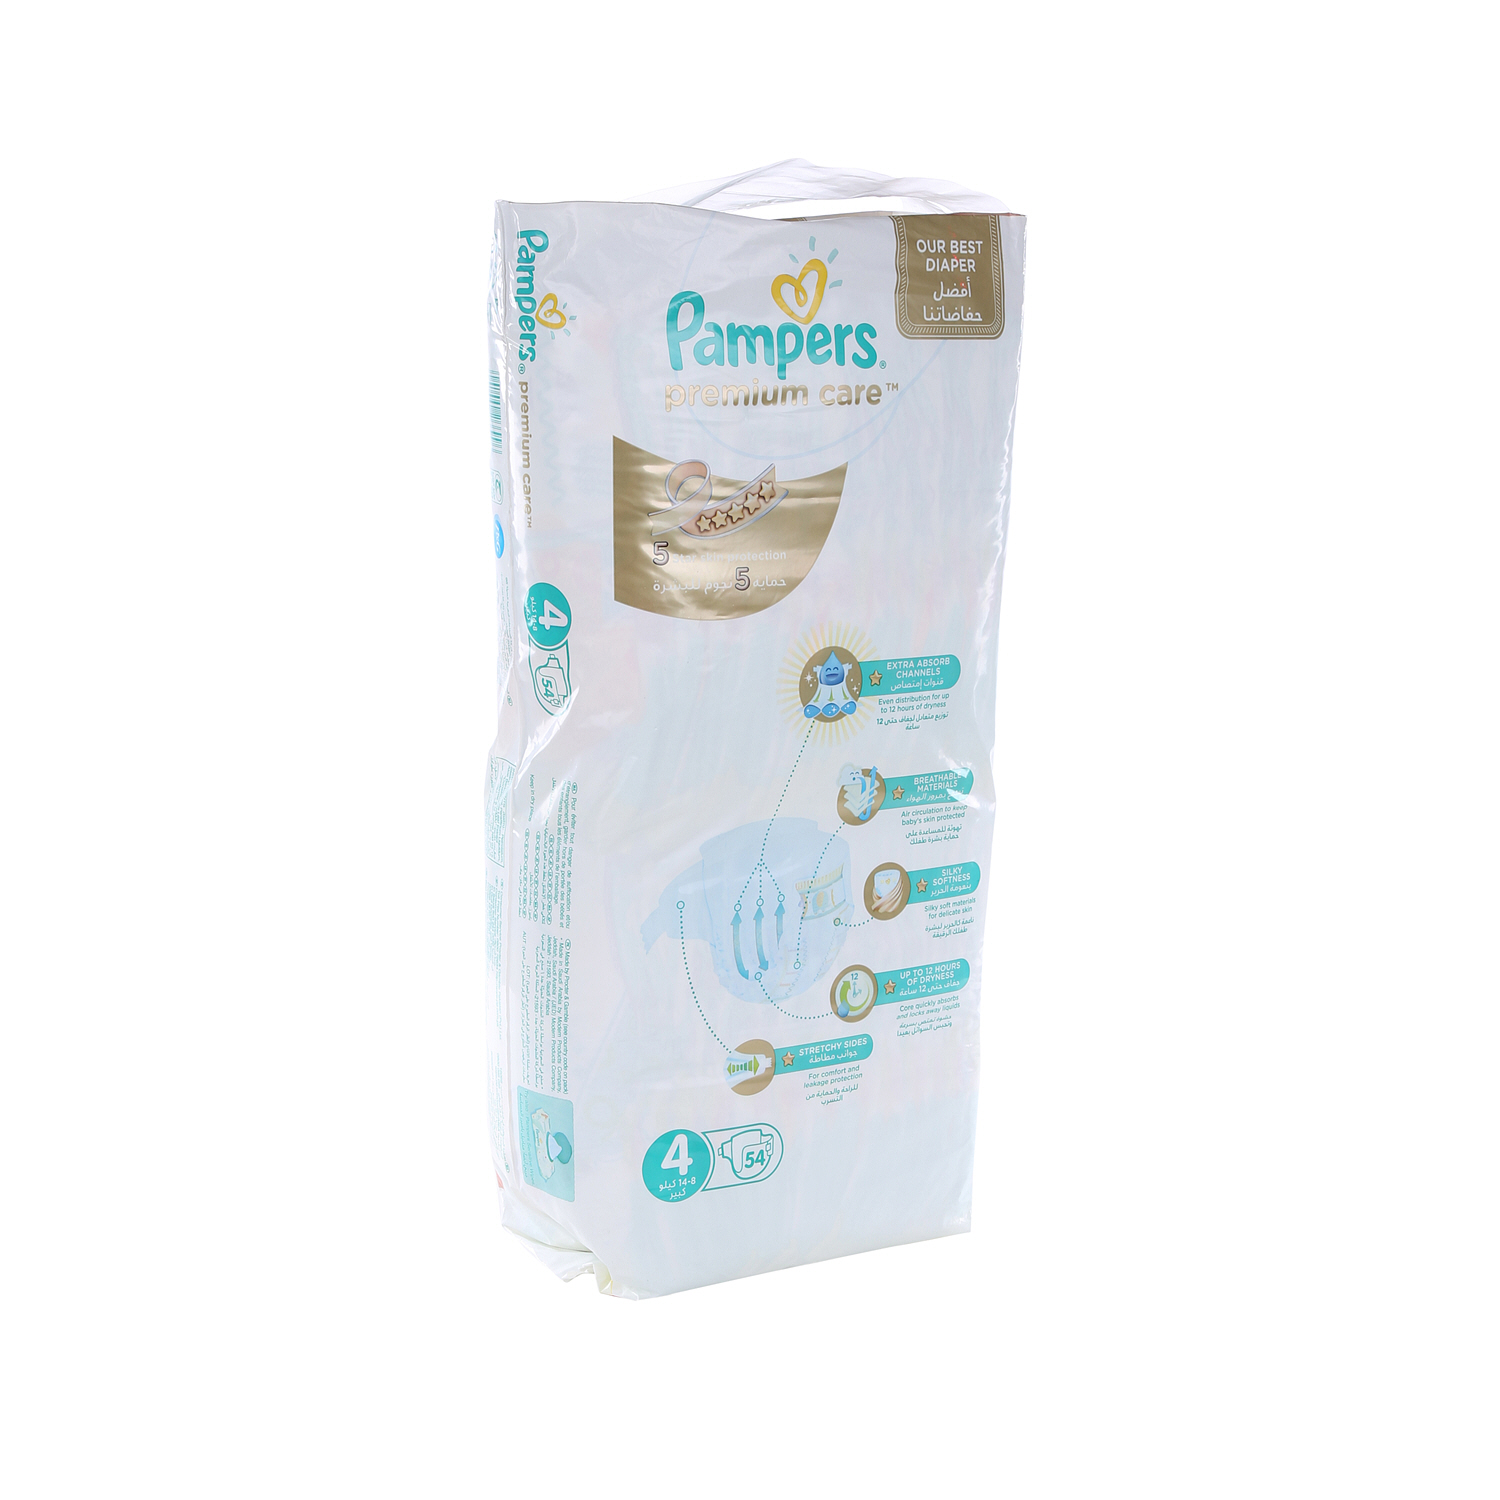 Pampers Premium Care Size 4 Pieces